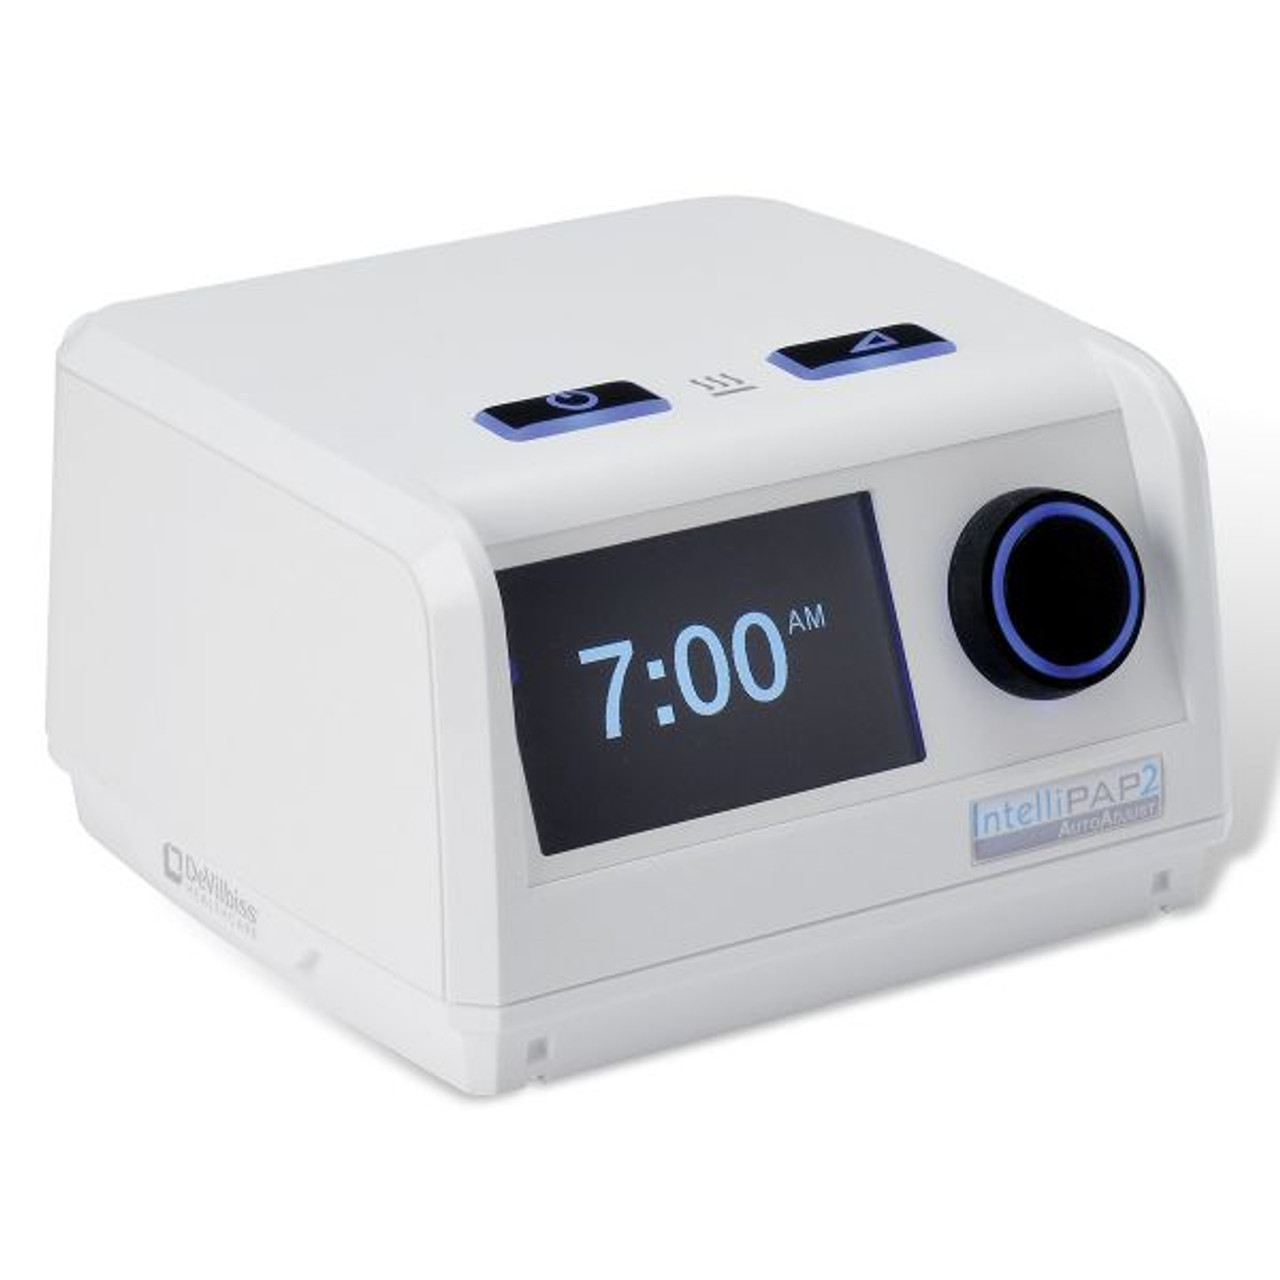 IntelliPAP 2 AutoAdjust CPAP with Pulse Dose Heated Humidification DV64D-HHPD (DV64D-HPPD)